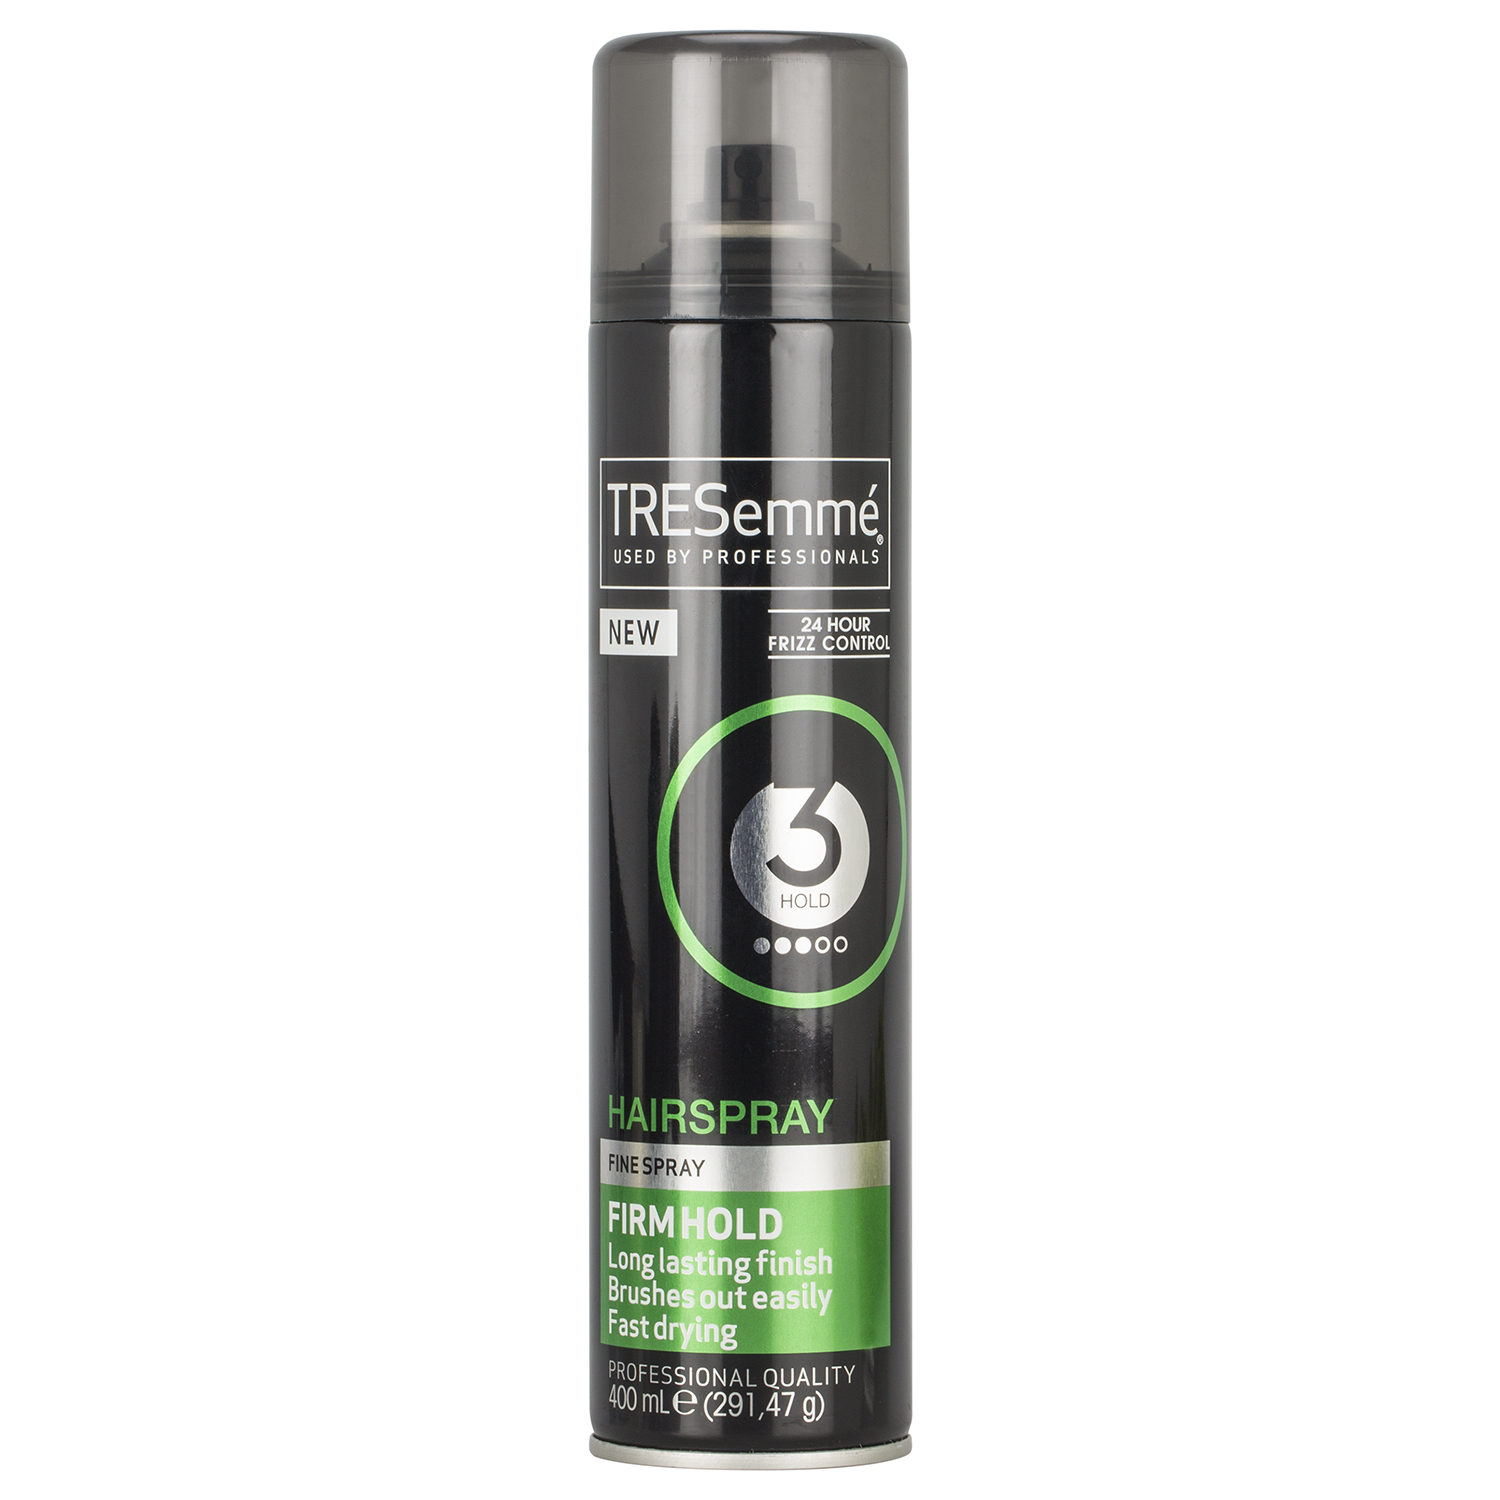 Tresemme Firm Hold 3 Hairspray Image